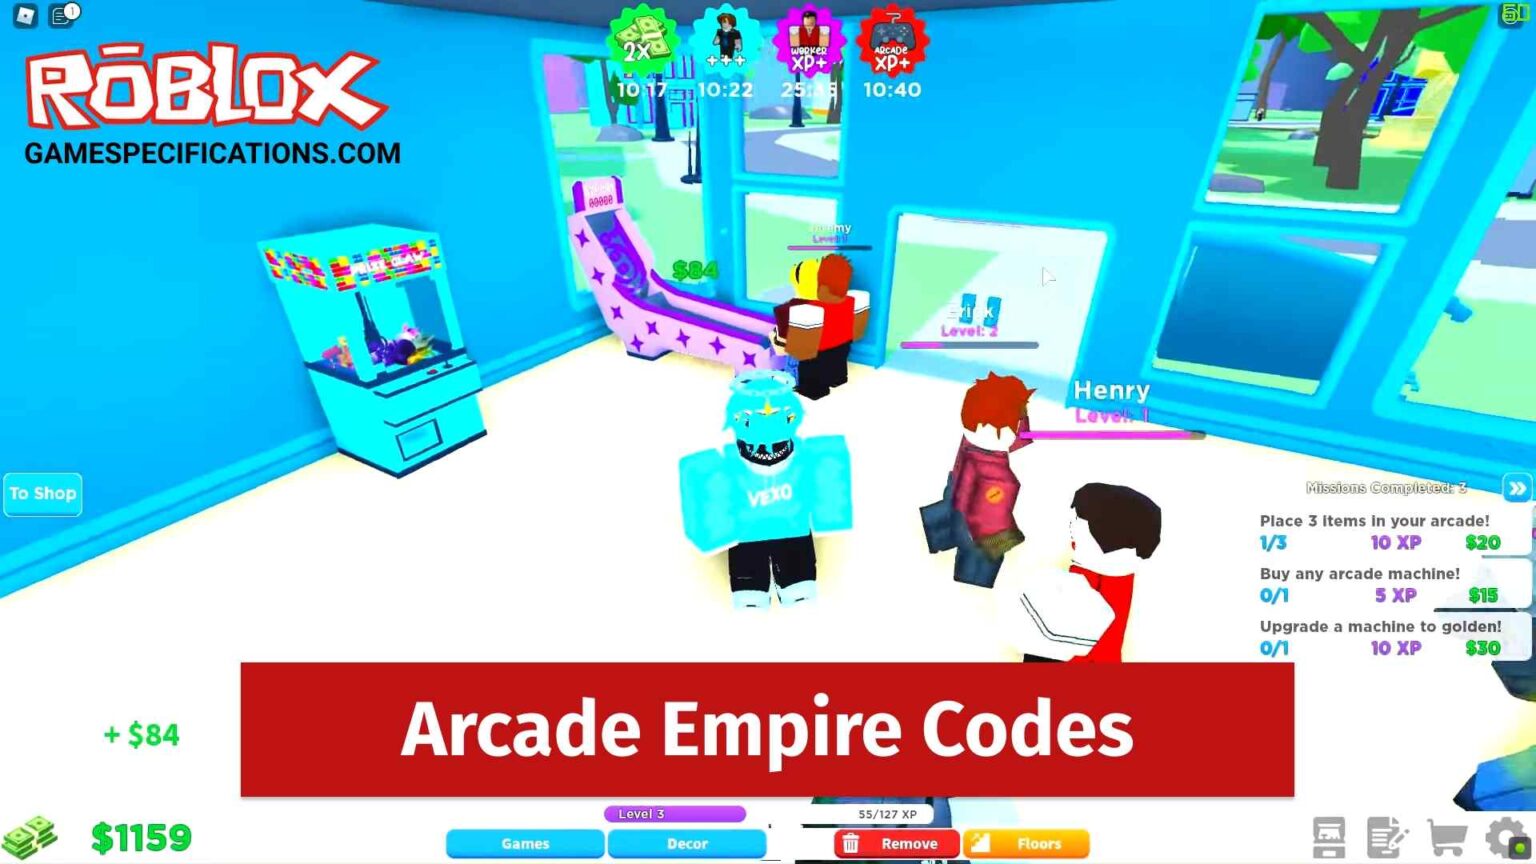 roblox-arcade-empire-codes-wiki-archives-game-specifications